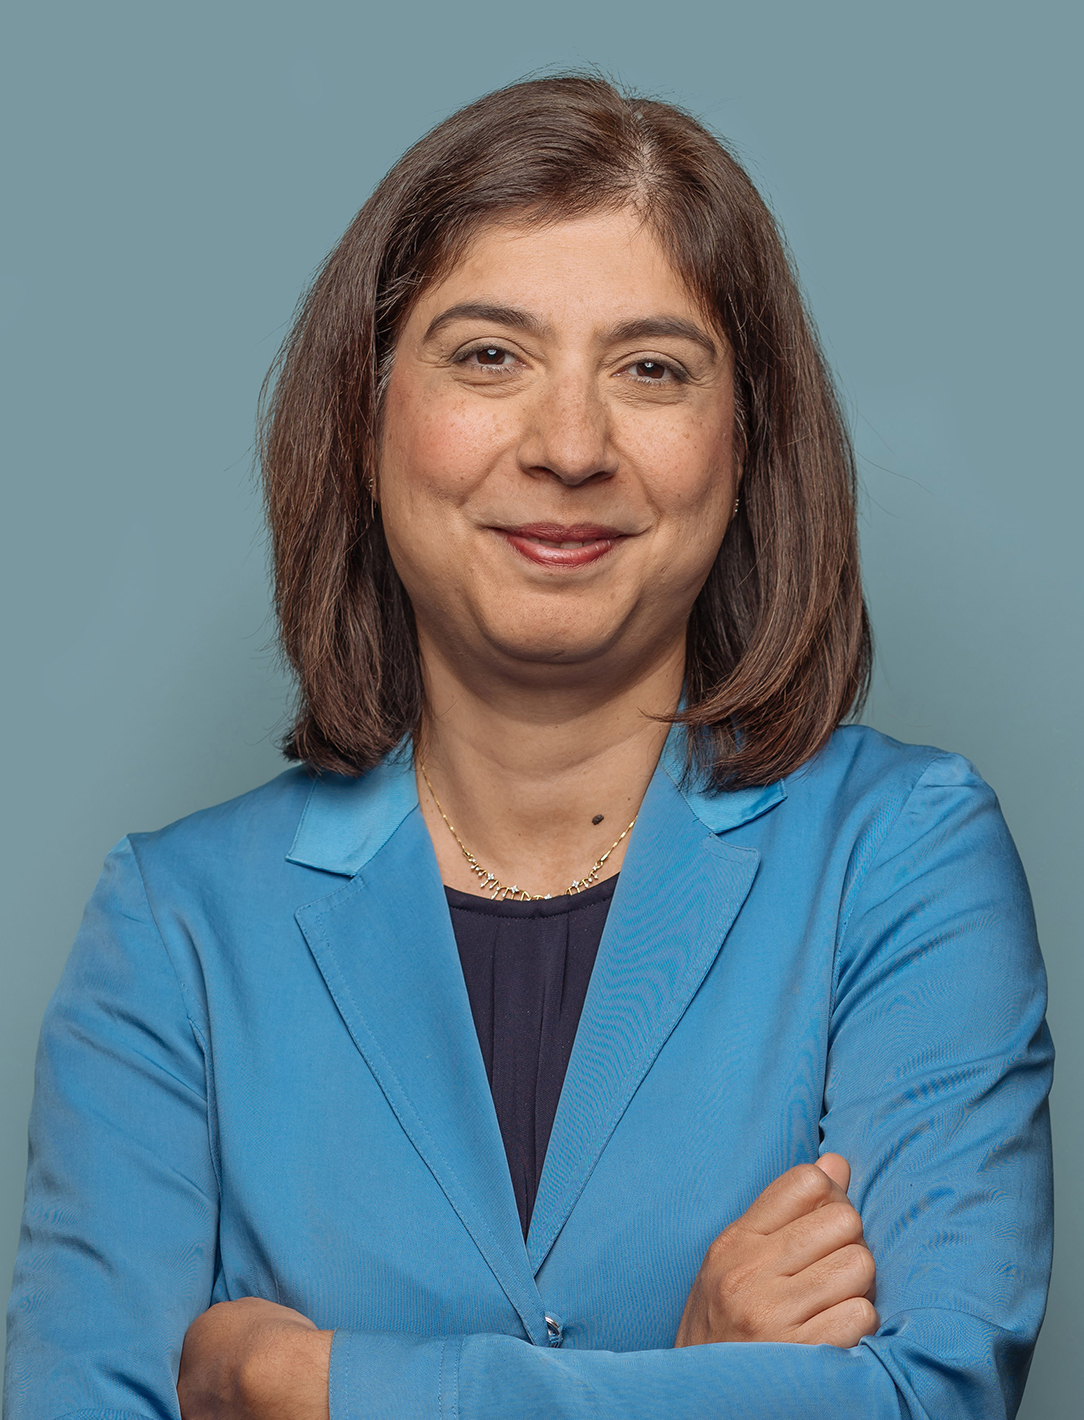 a portrait of Reshma Kewalramani, the first female CEO of Vertex, a large biotech firm